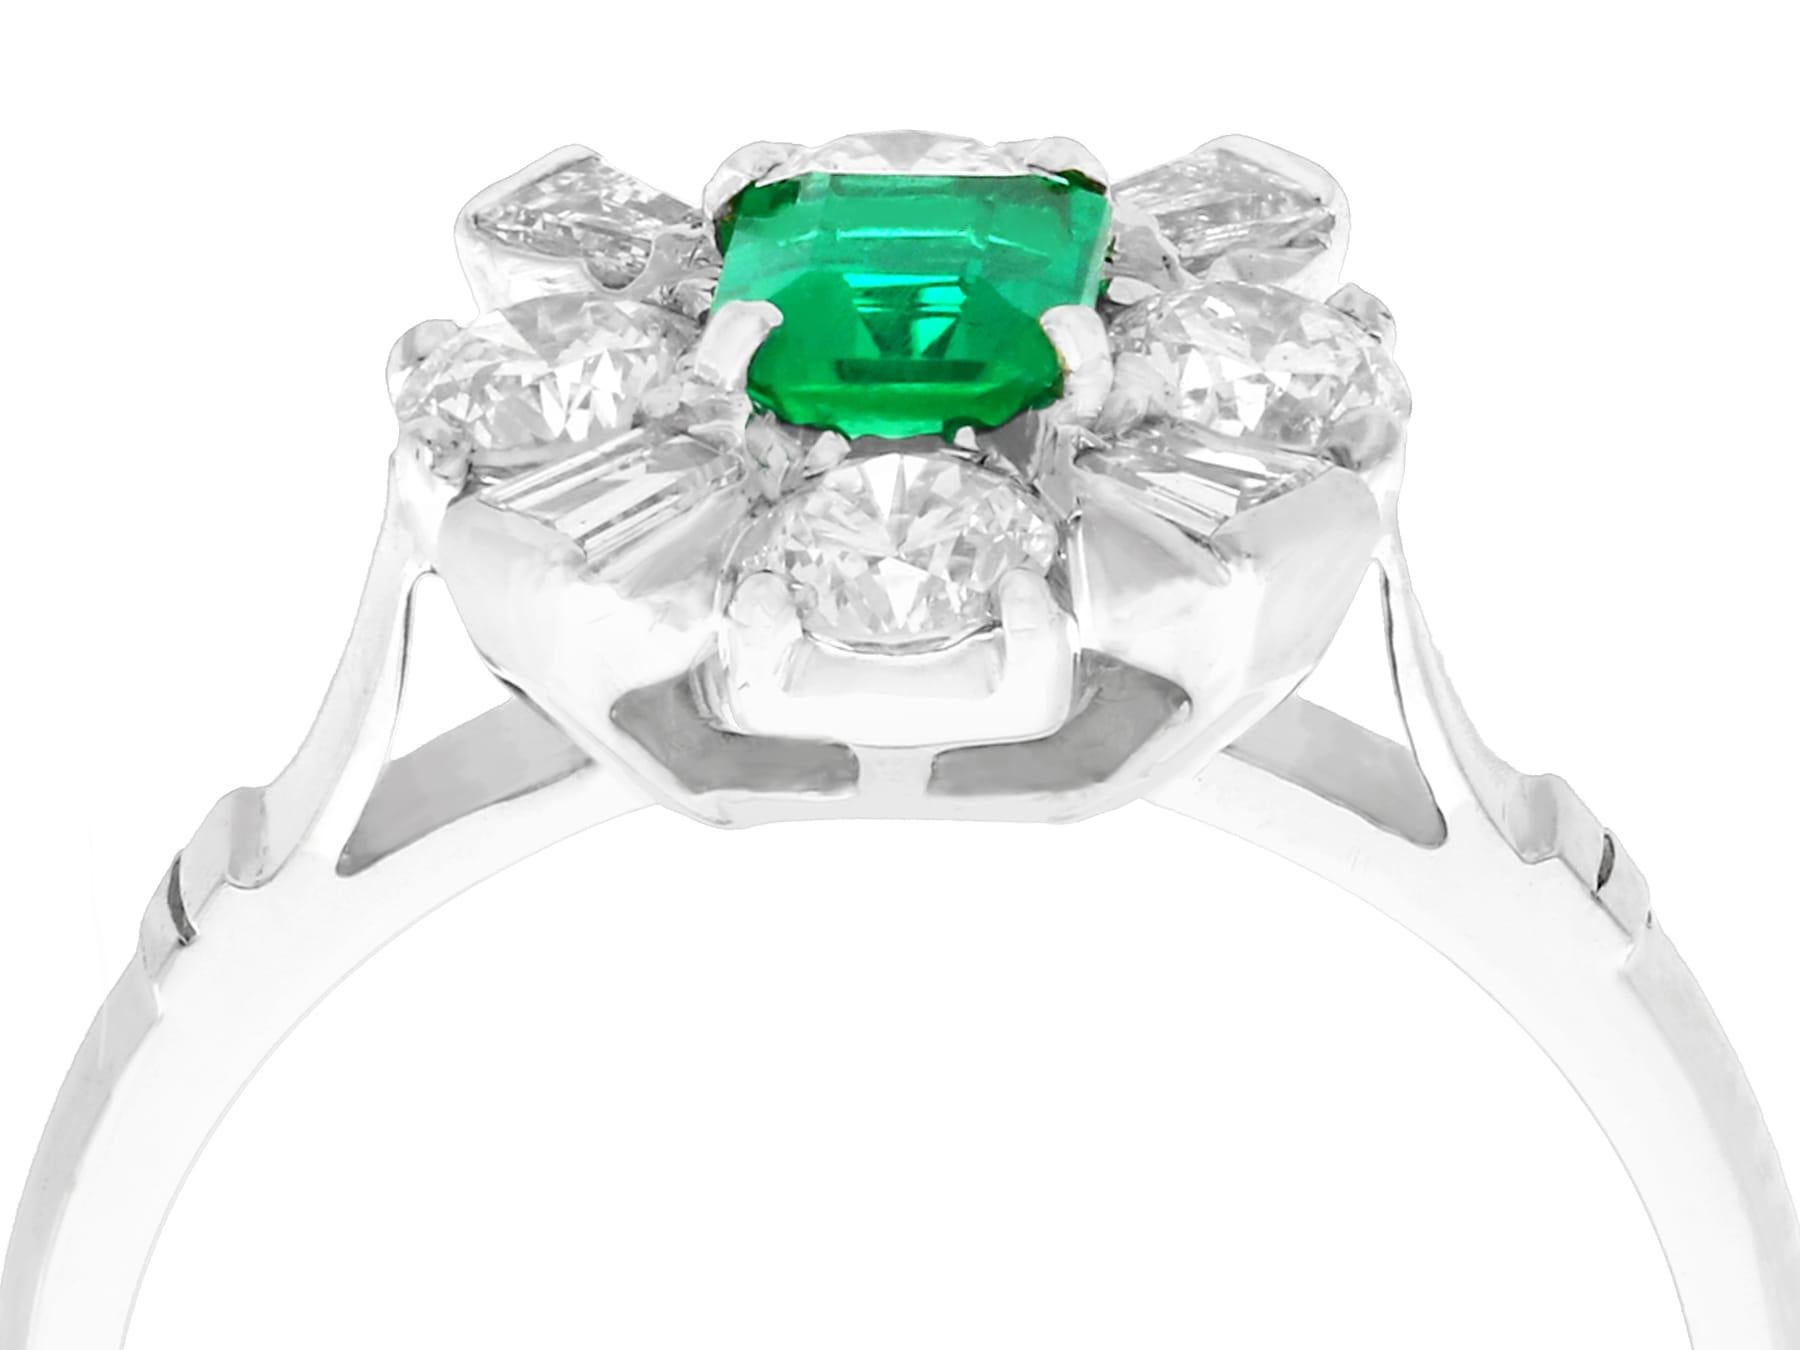 An exceptional, fine and impressive contemporary 0.38 carat natural emerald and 0.54 carat diamond, 18 karat white gold cluster ring; part of our contemporary jewelry and estate jewelry collections.

This exceptional contemporary emerald cluster